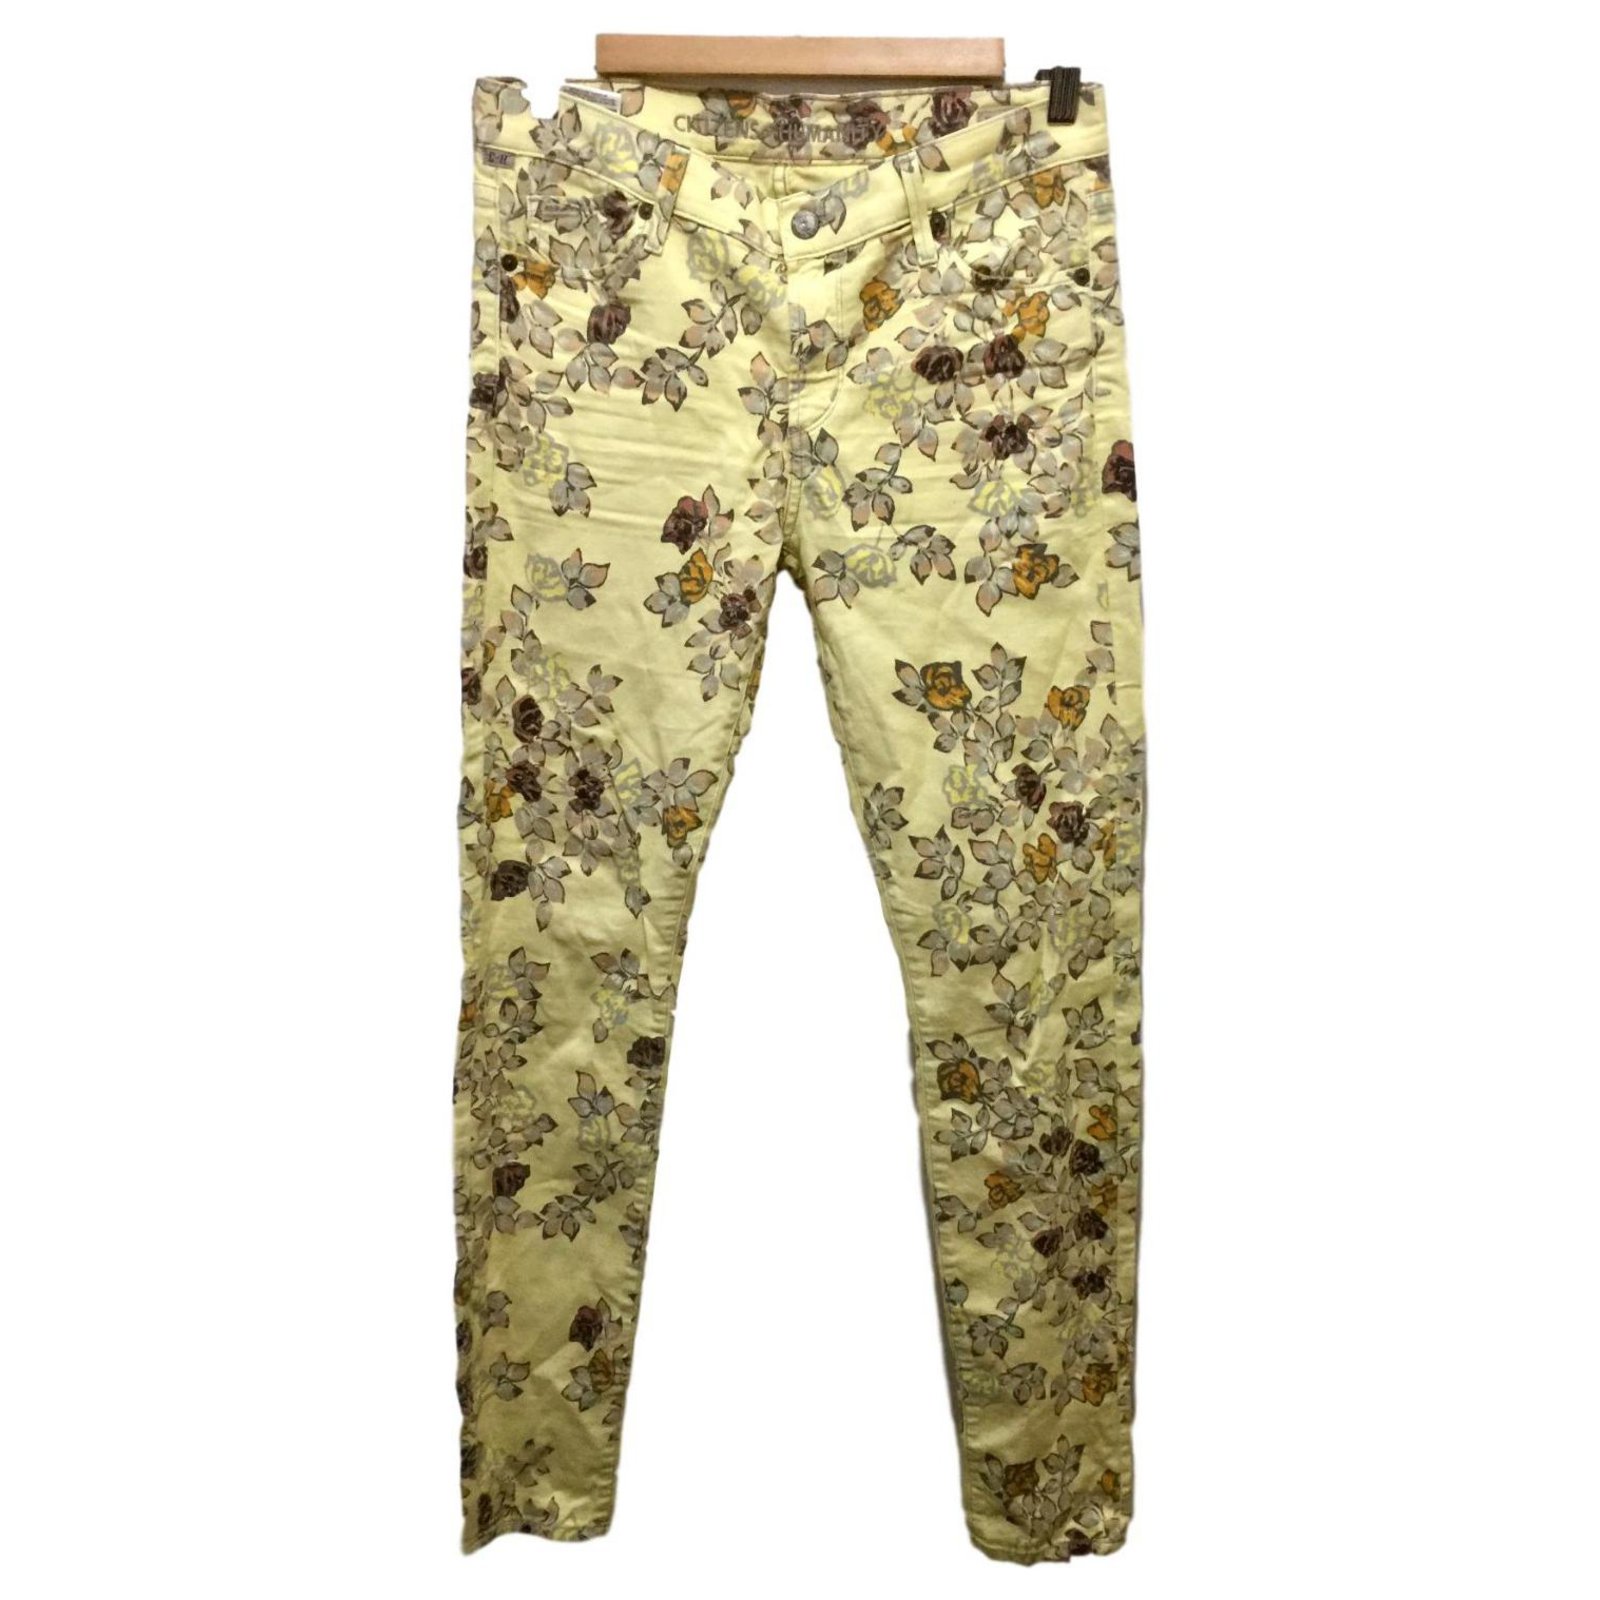 citizens of humanity floral jeans